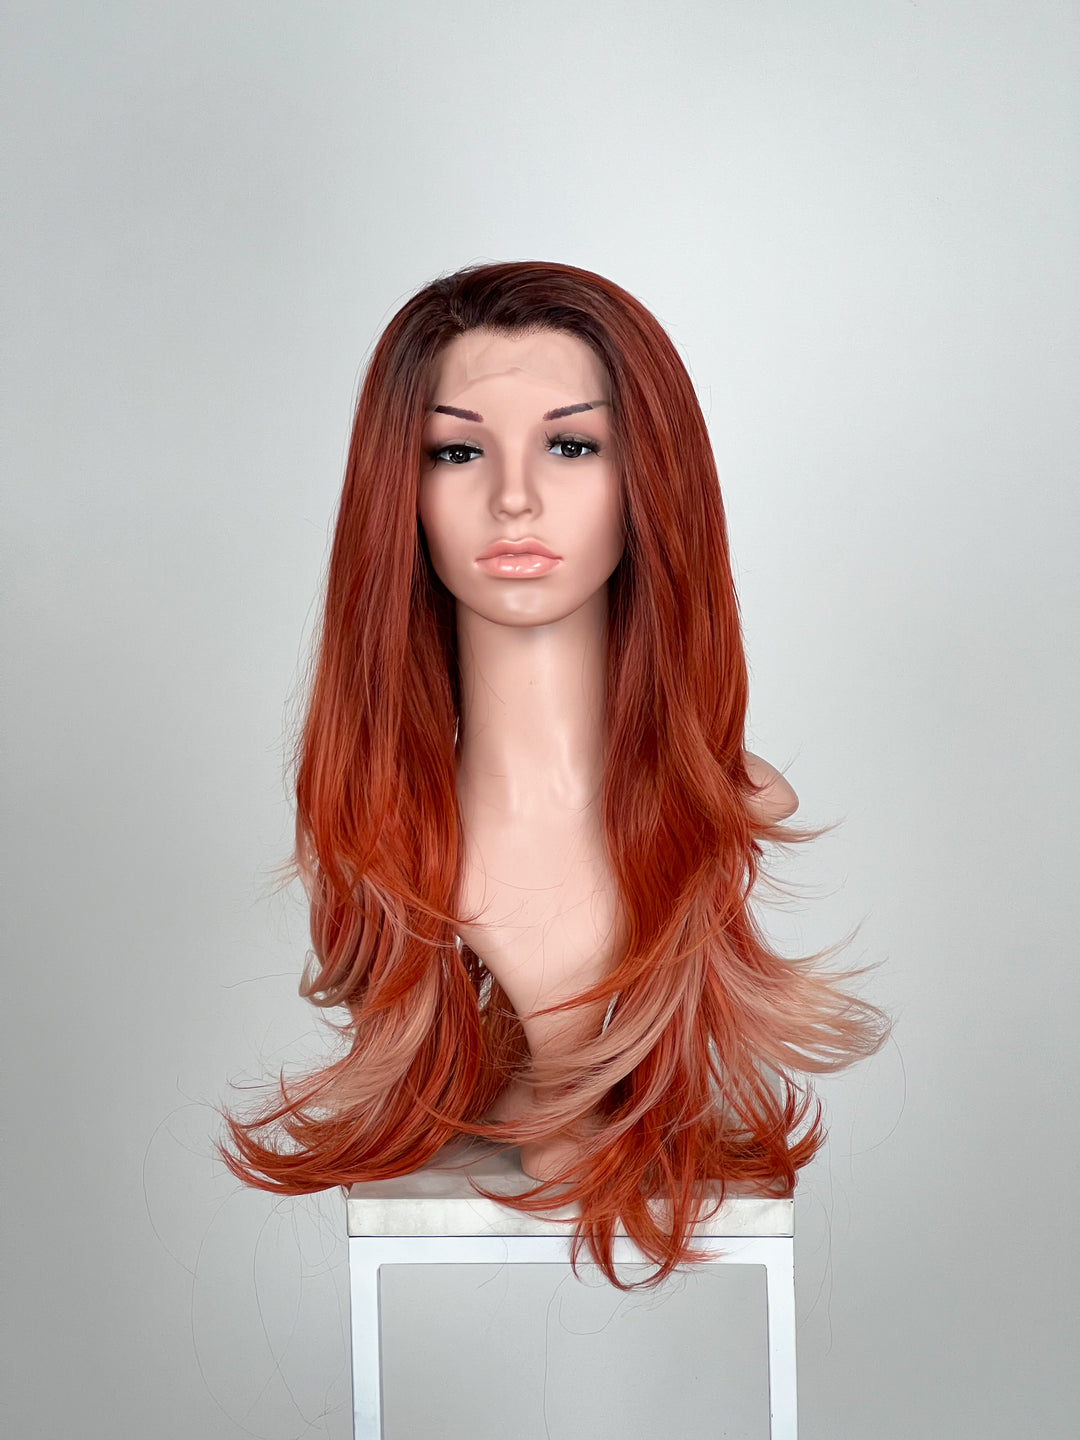 Marina Tropical Sunset Red Long Straight Lace Front Wig - Princess Series LPSKY53 Color: dark roots flowing into a reddish/orange ombre that fade into light pink blended ends